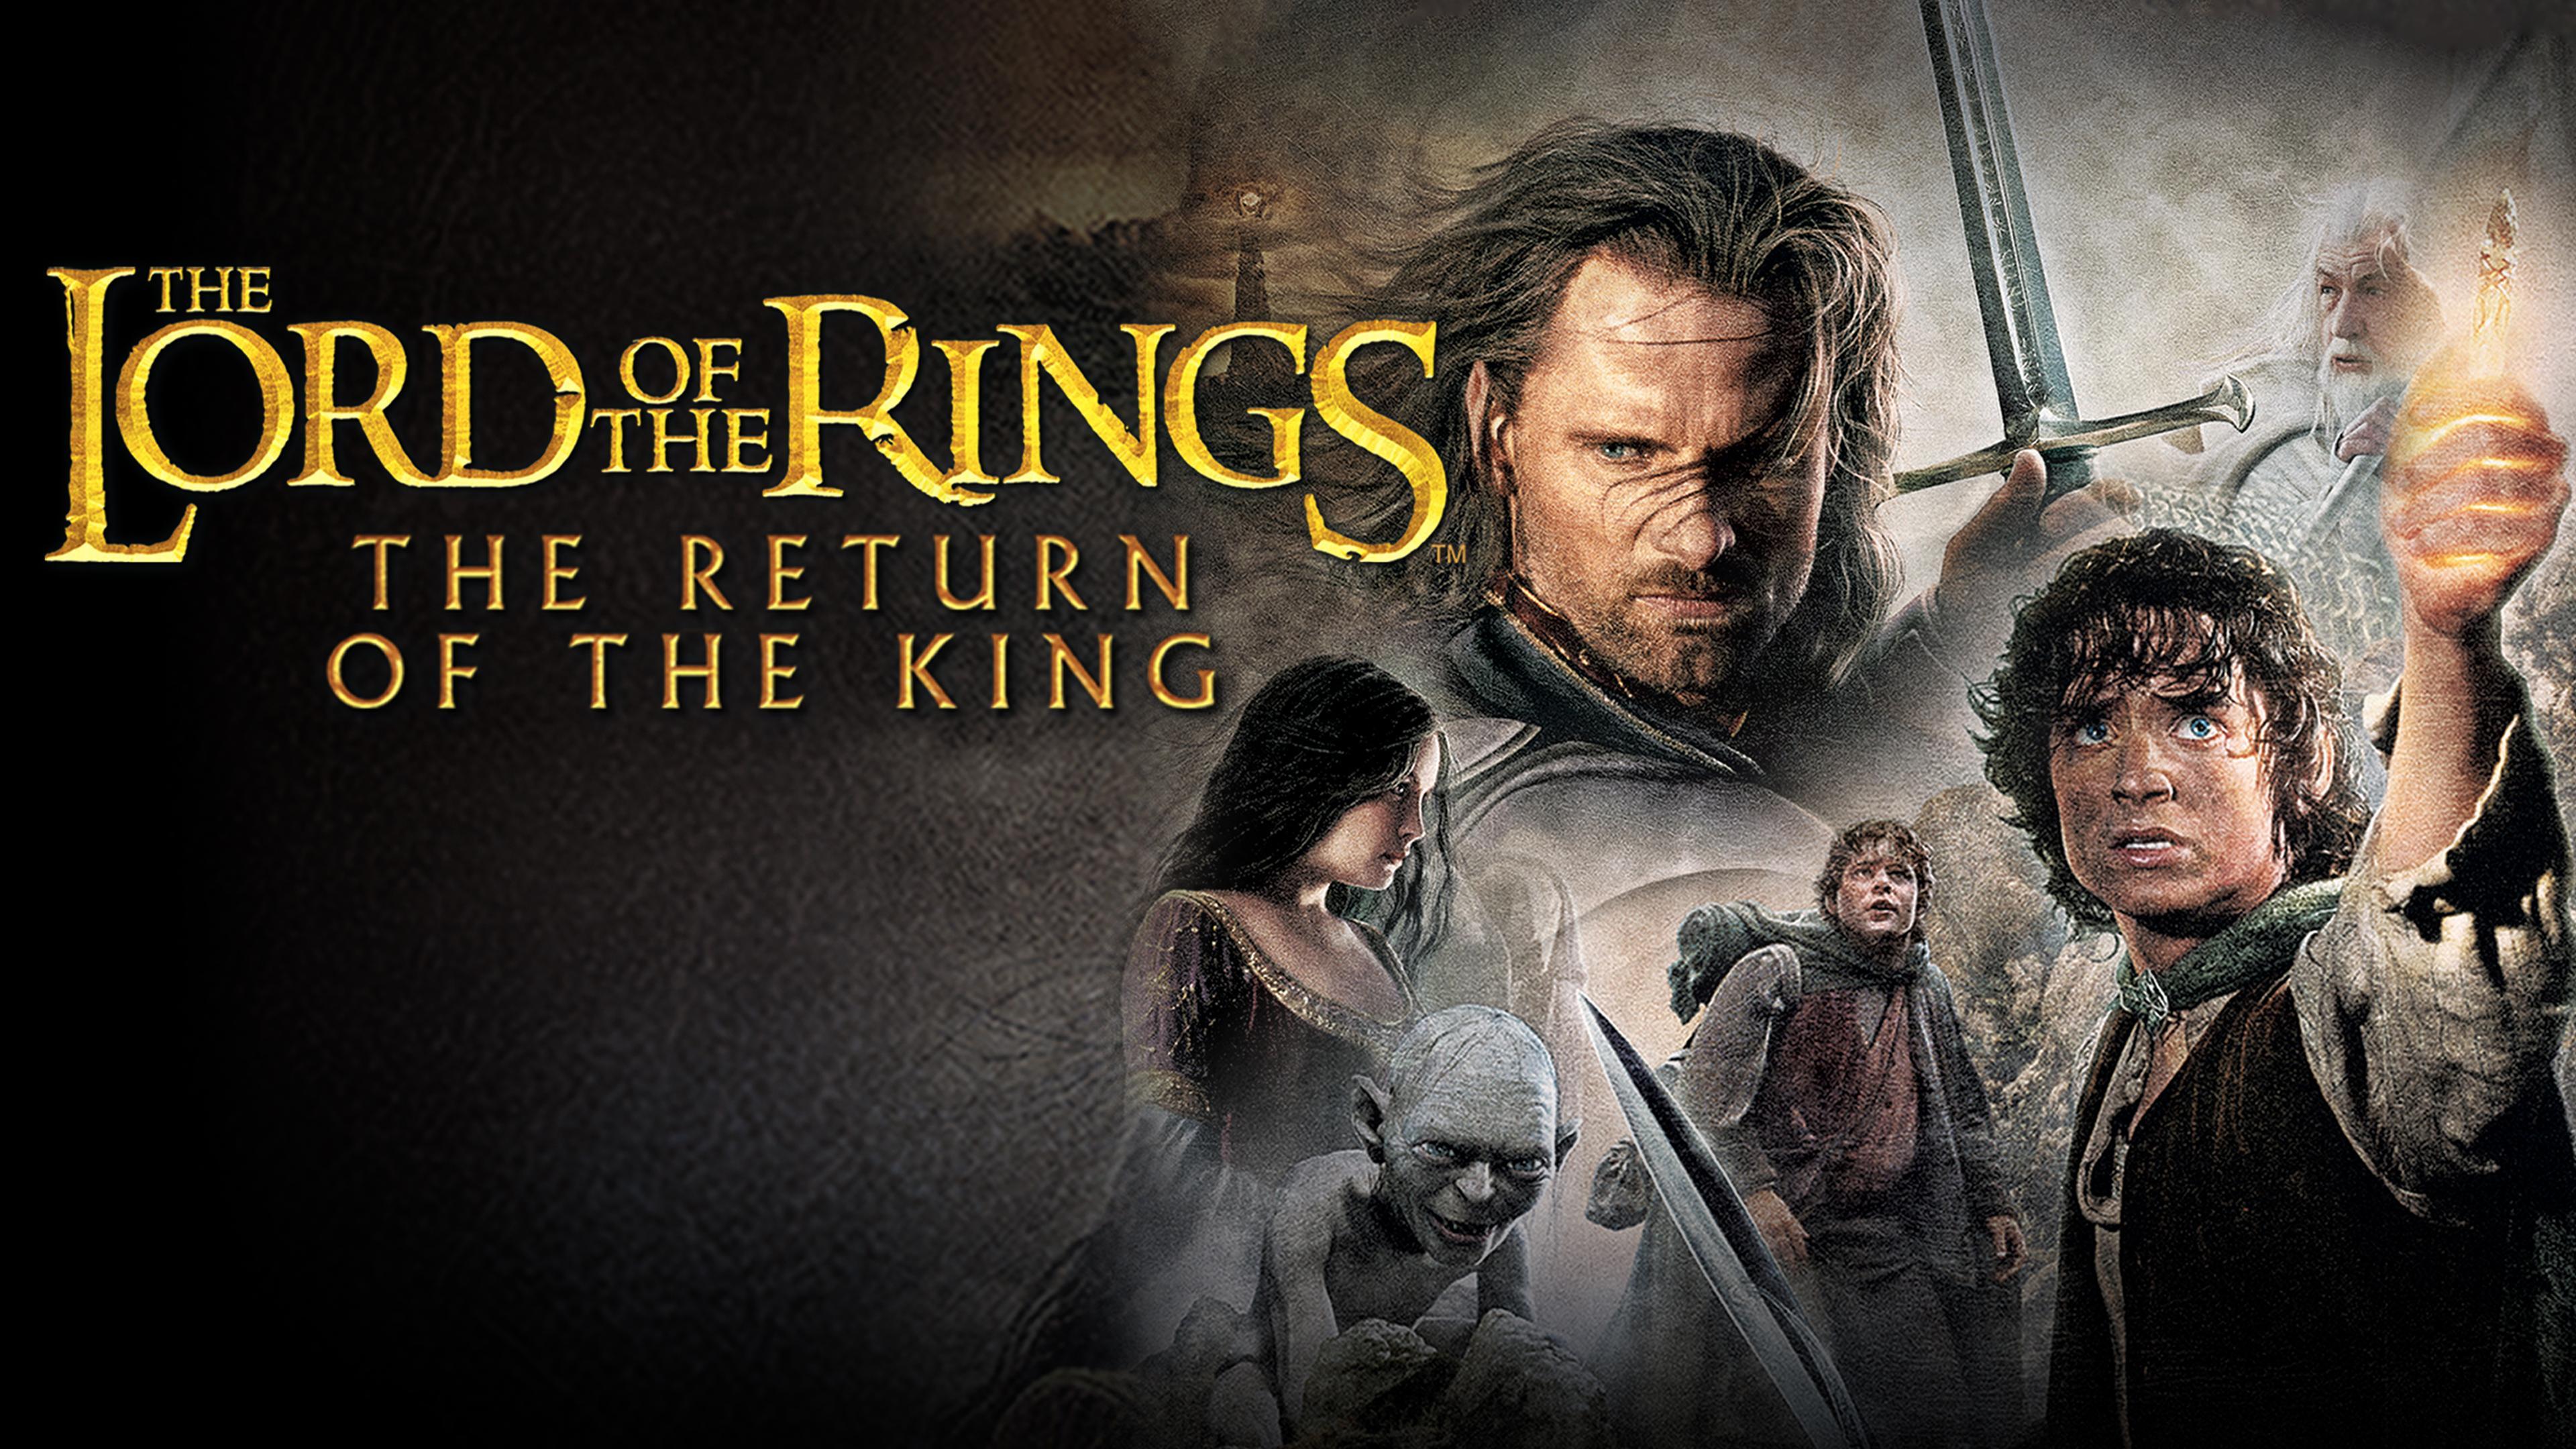 Watch Party: Lord of the Rings